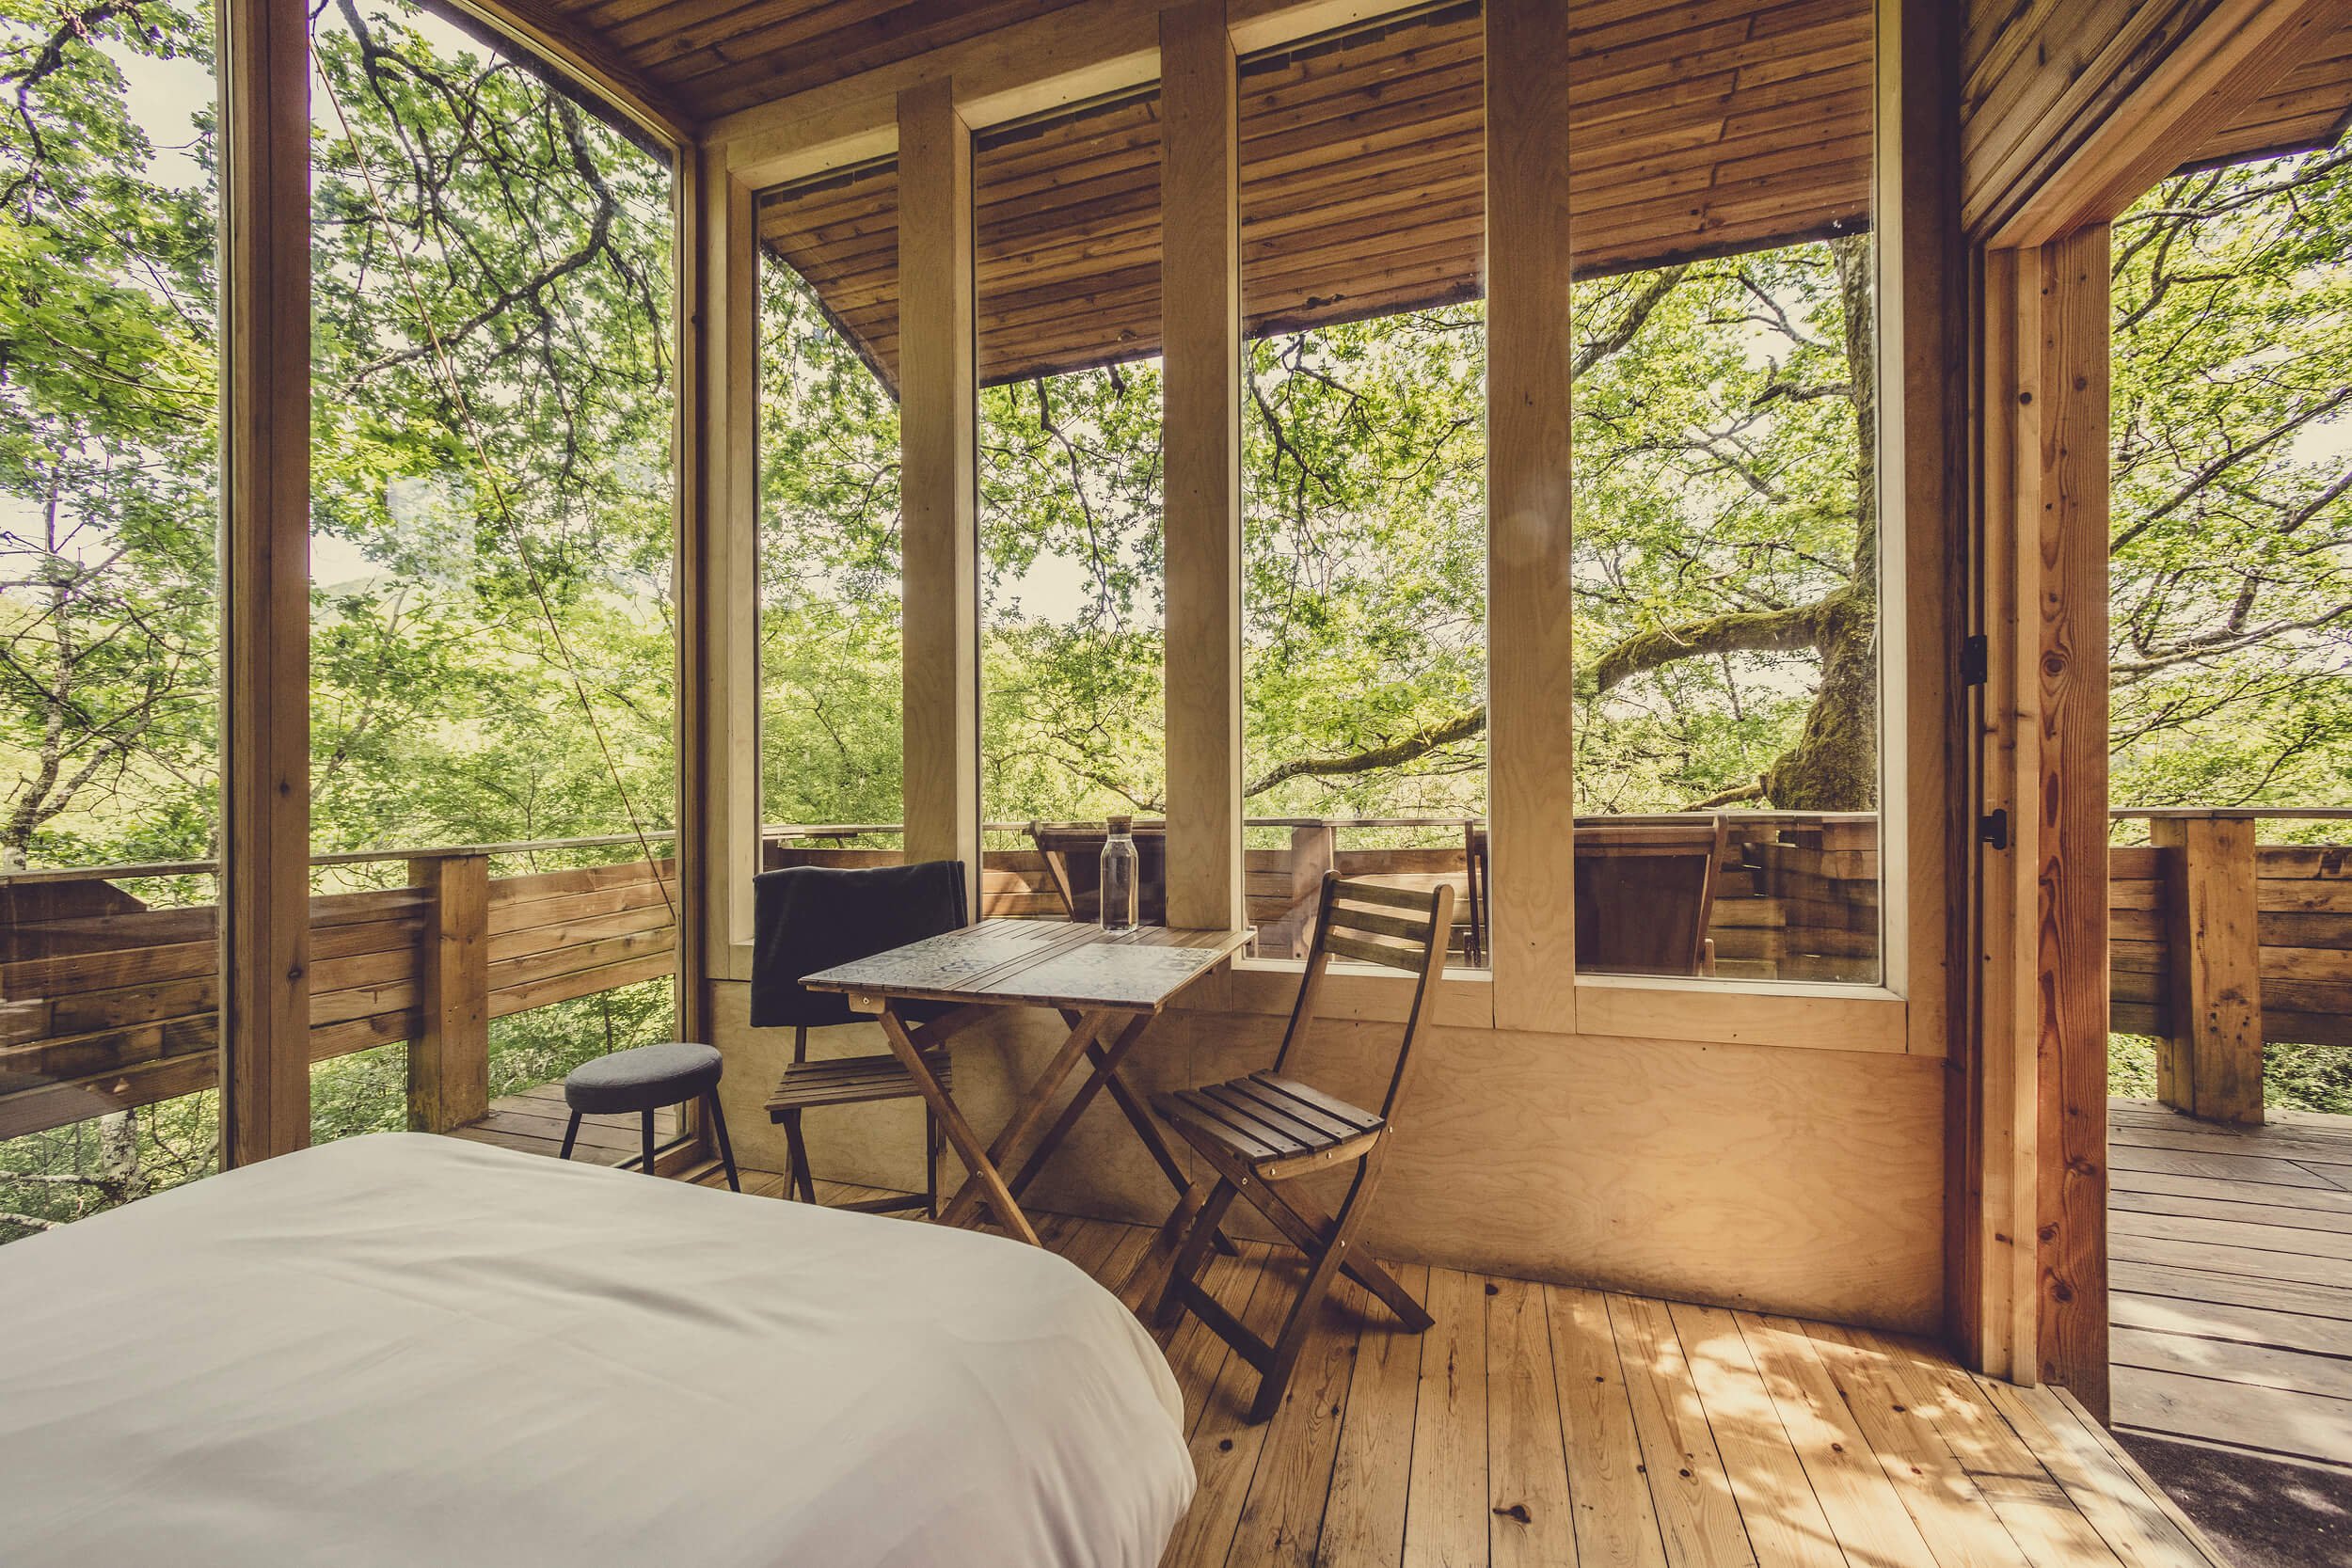 Escape to the forest- a look inside Basoa Suites' treehouses by MuruStudios advertising photographers in Madrid Barcelona Pamplona Spain 41.jpg